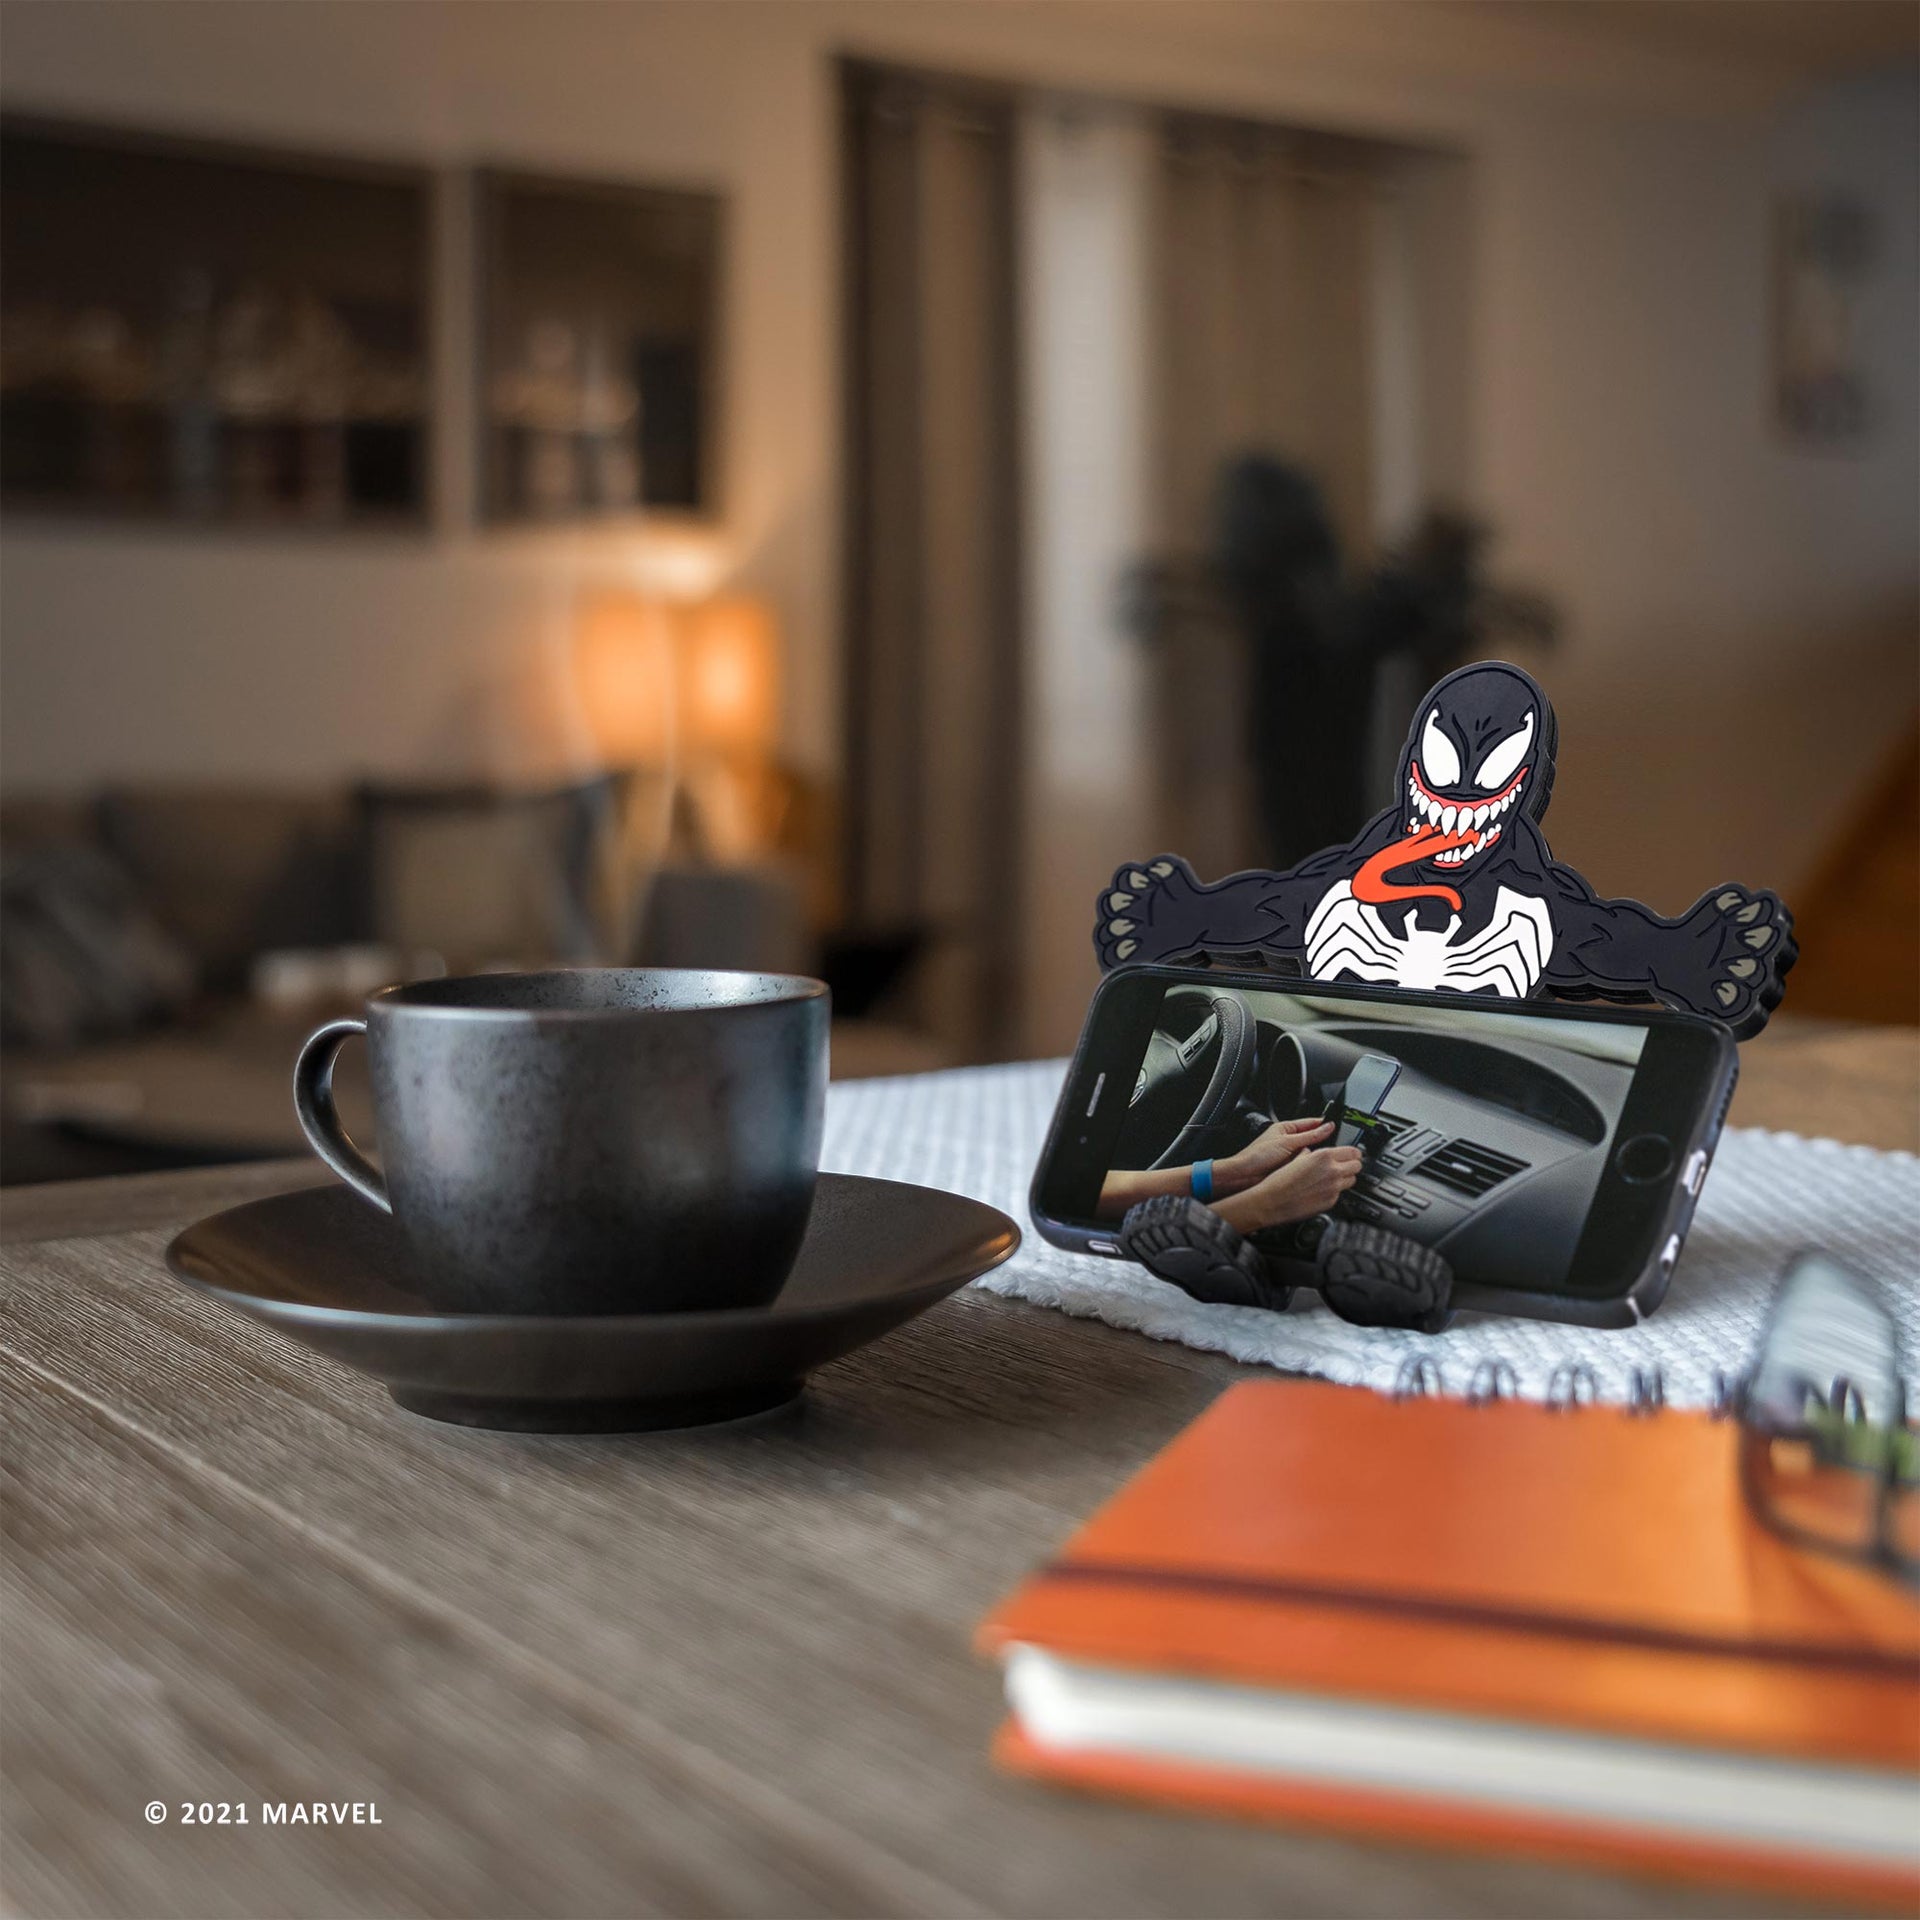 Image of Marvel Comics Venom Hug Buddy holding a phone displaying a video, on top of a kitchen table beside a warm cup of coffee or tea